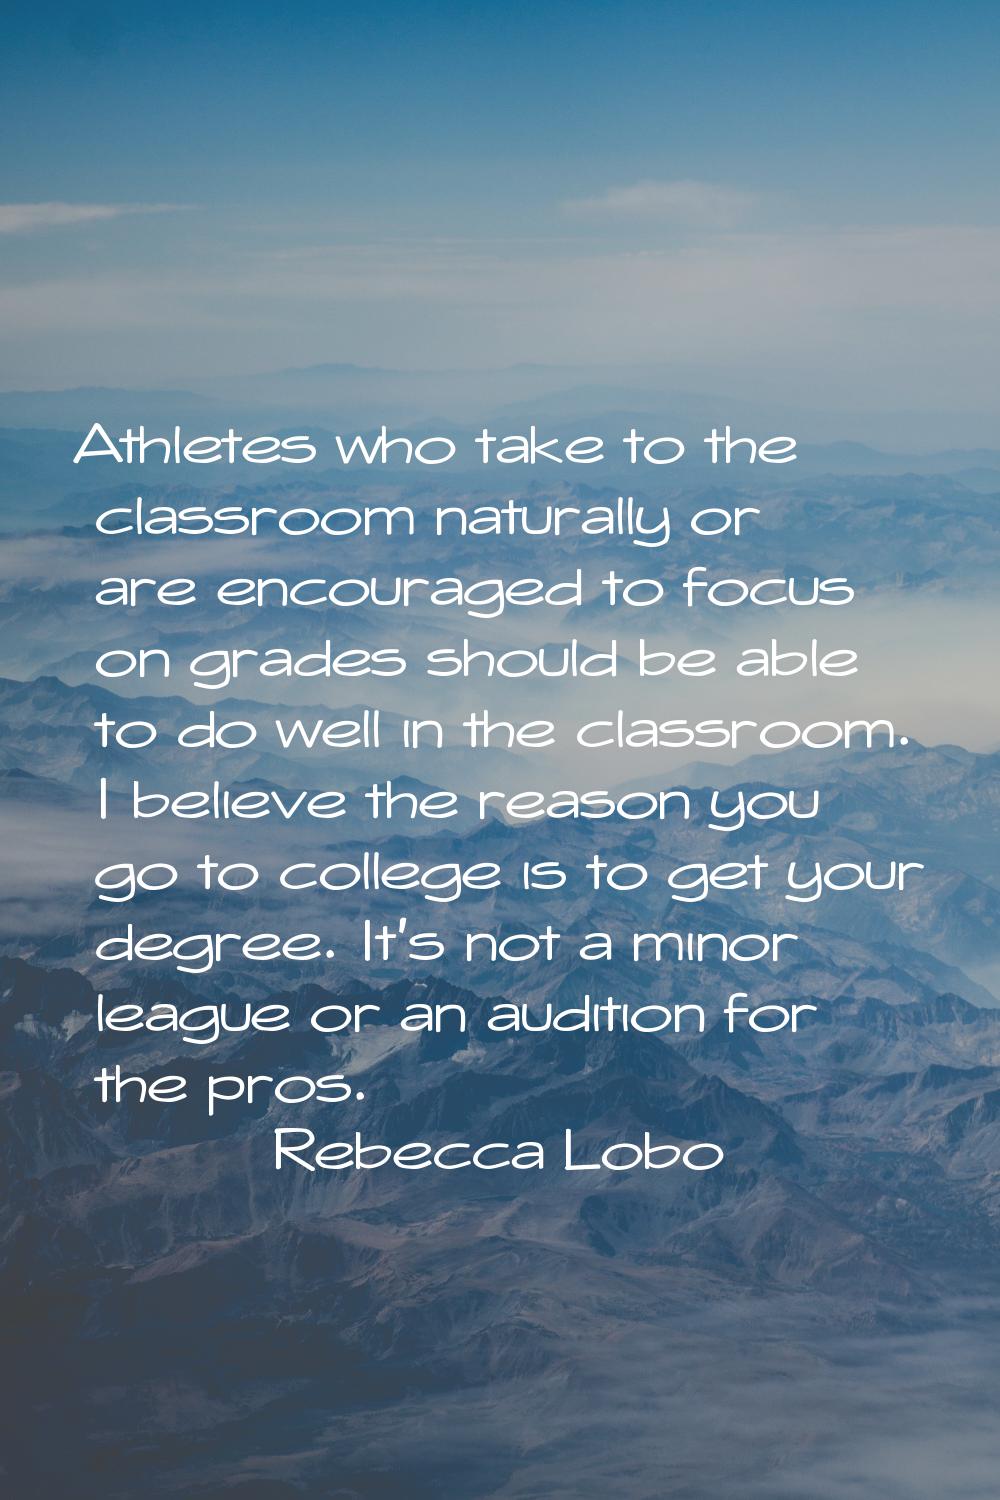 Athletes who take to the classroom naturally or are encouraged to focus on grades should be able to